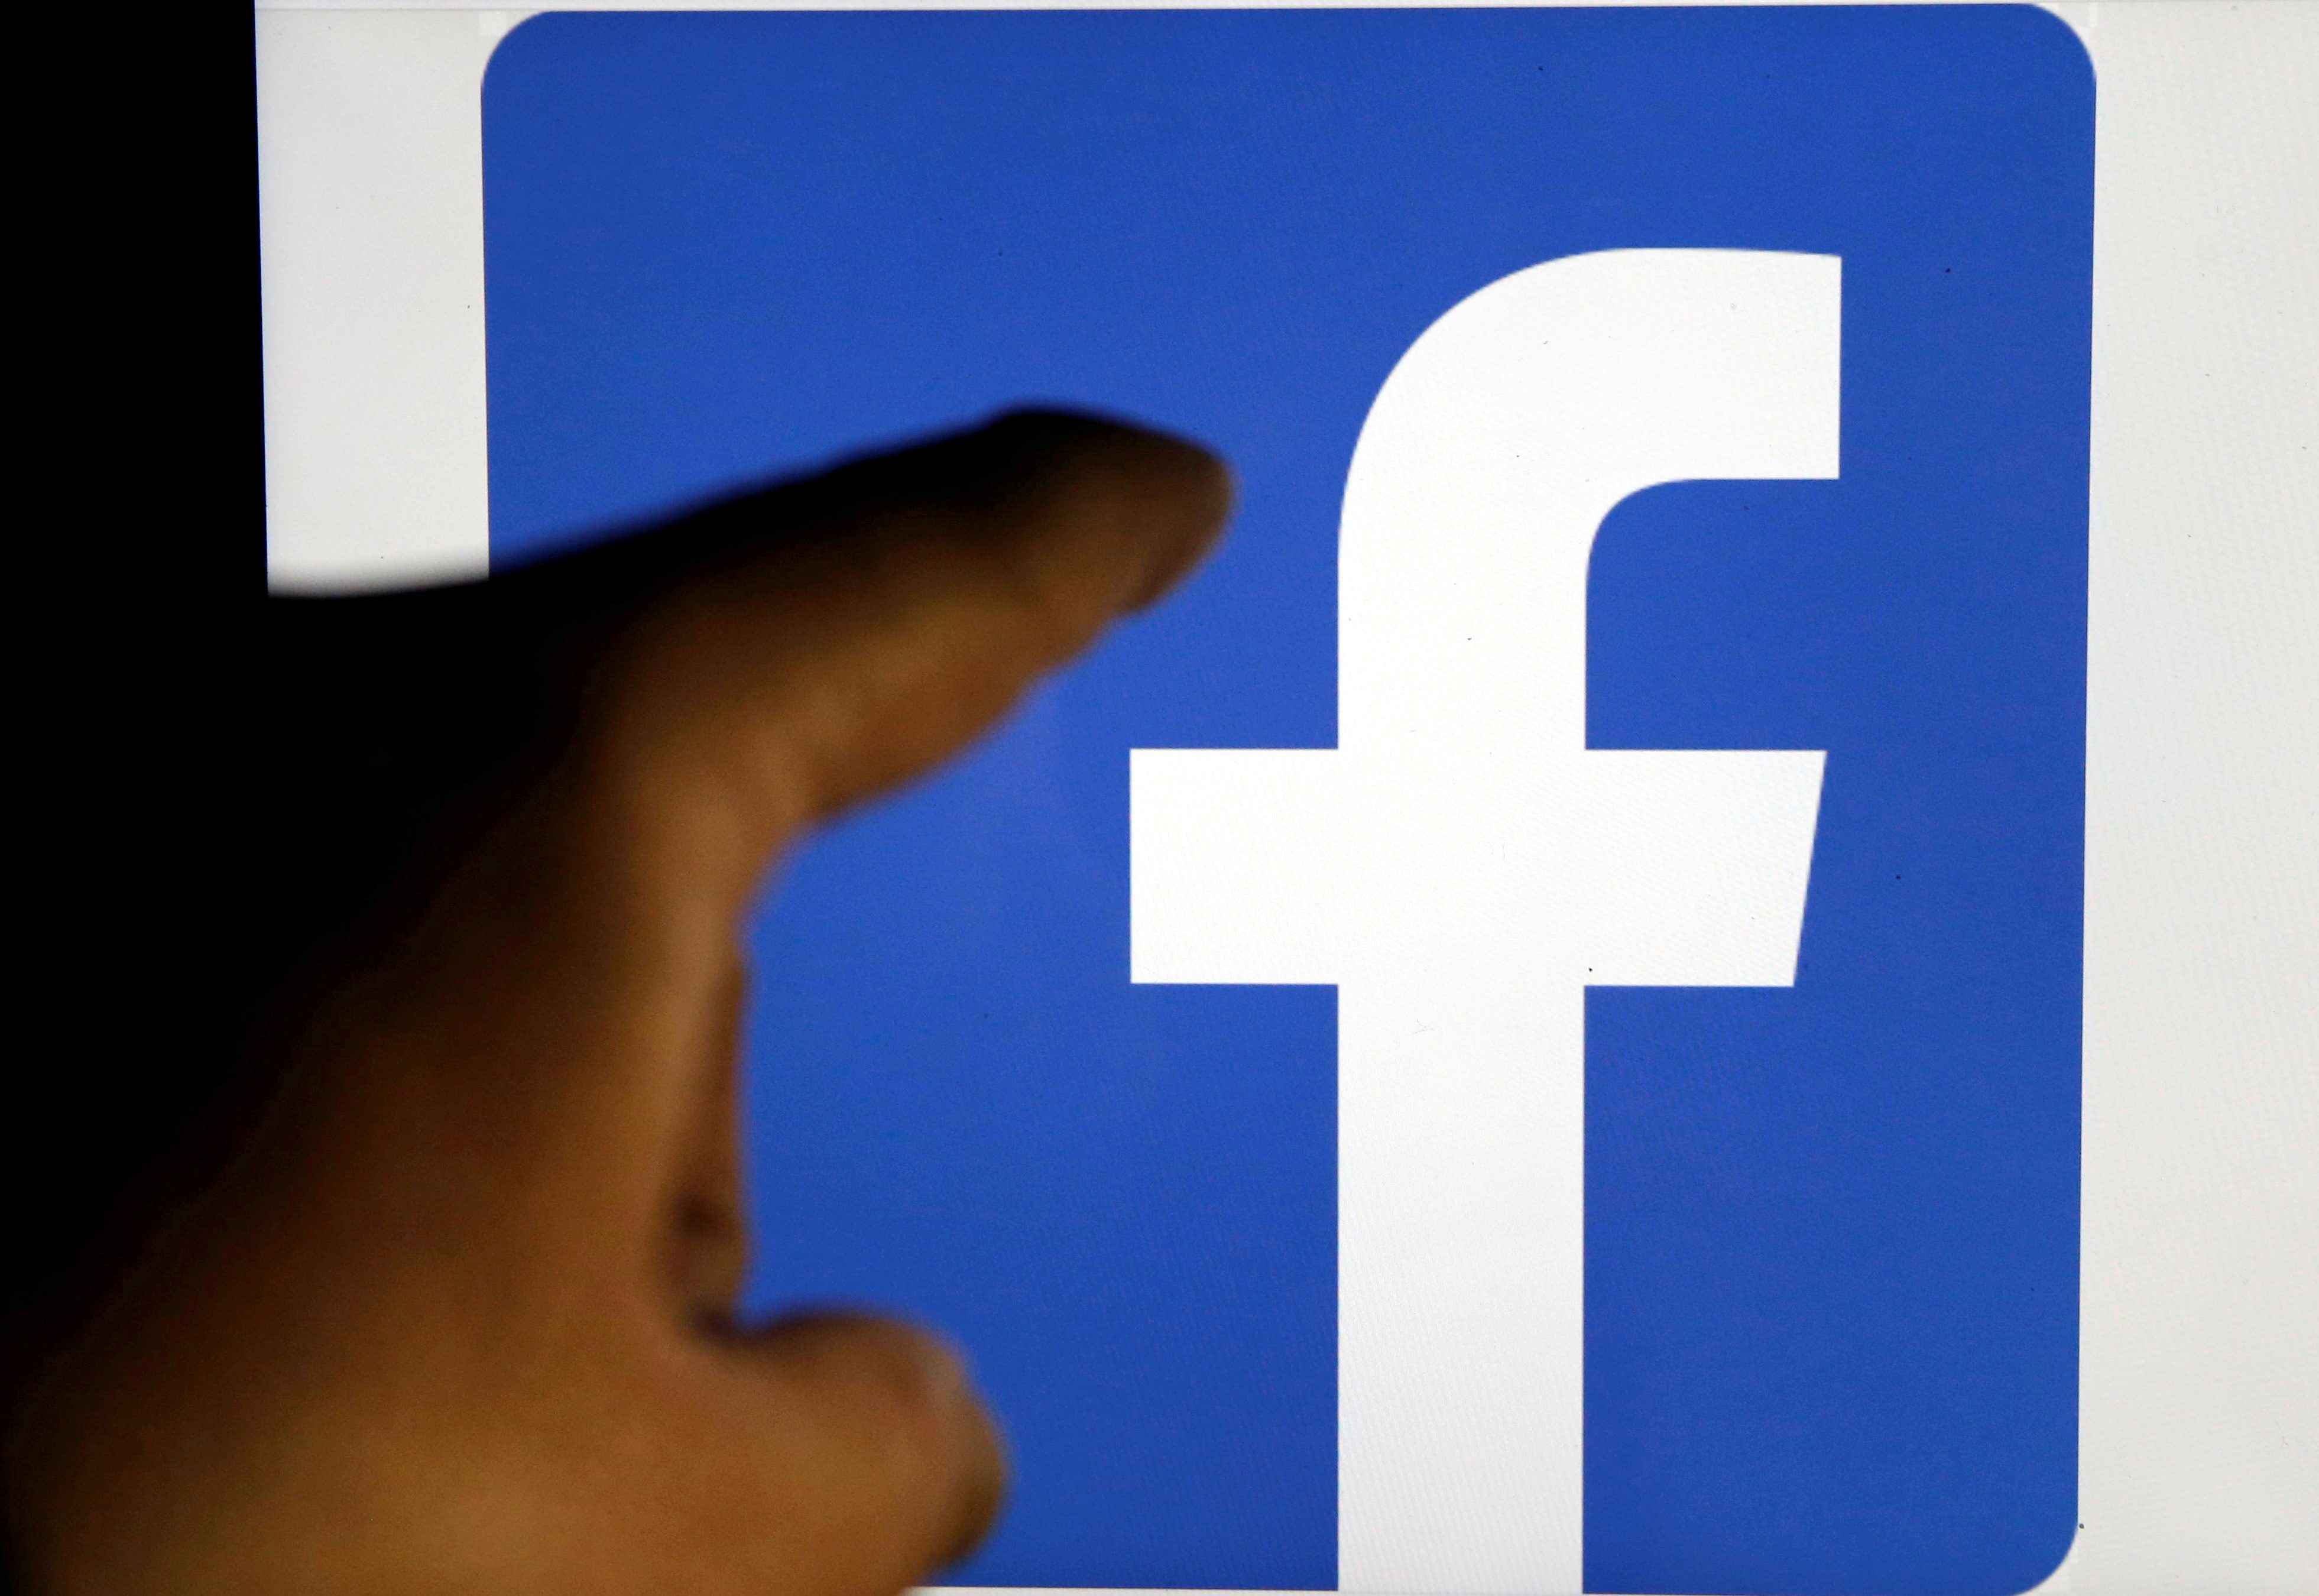 Facebook will try to ‘nudge’ teens away from harmful content